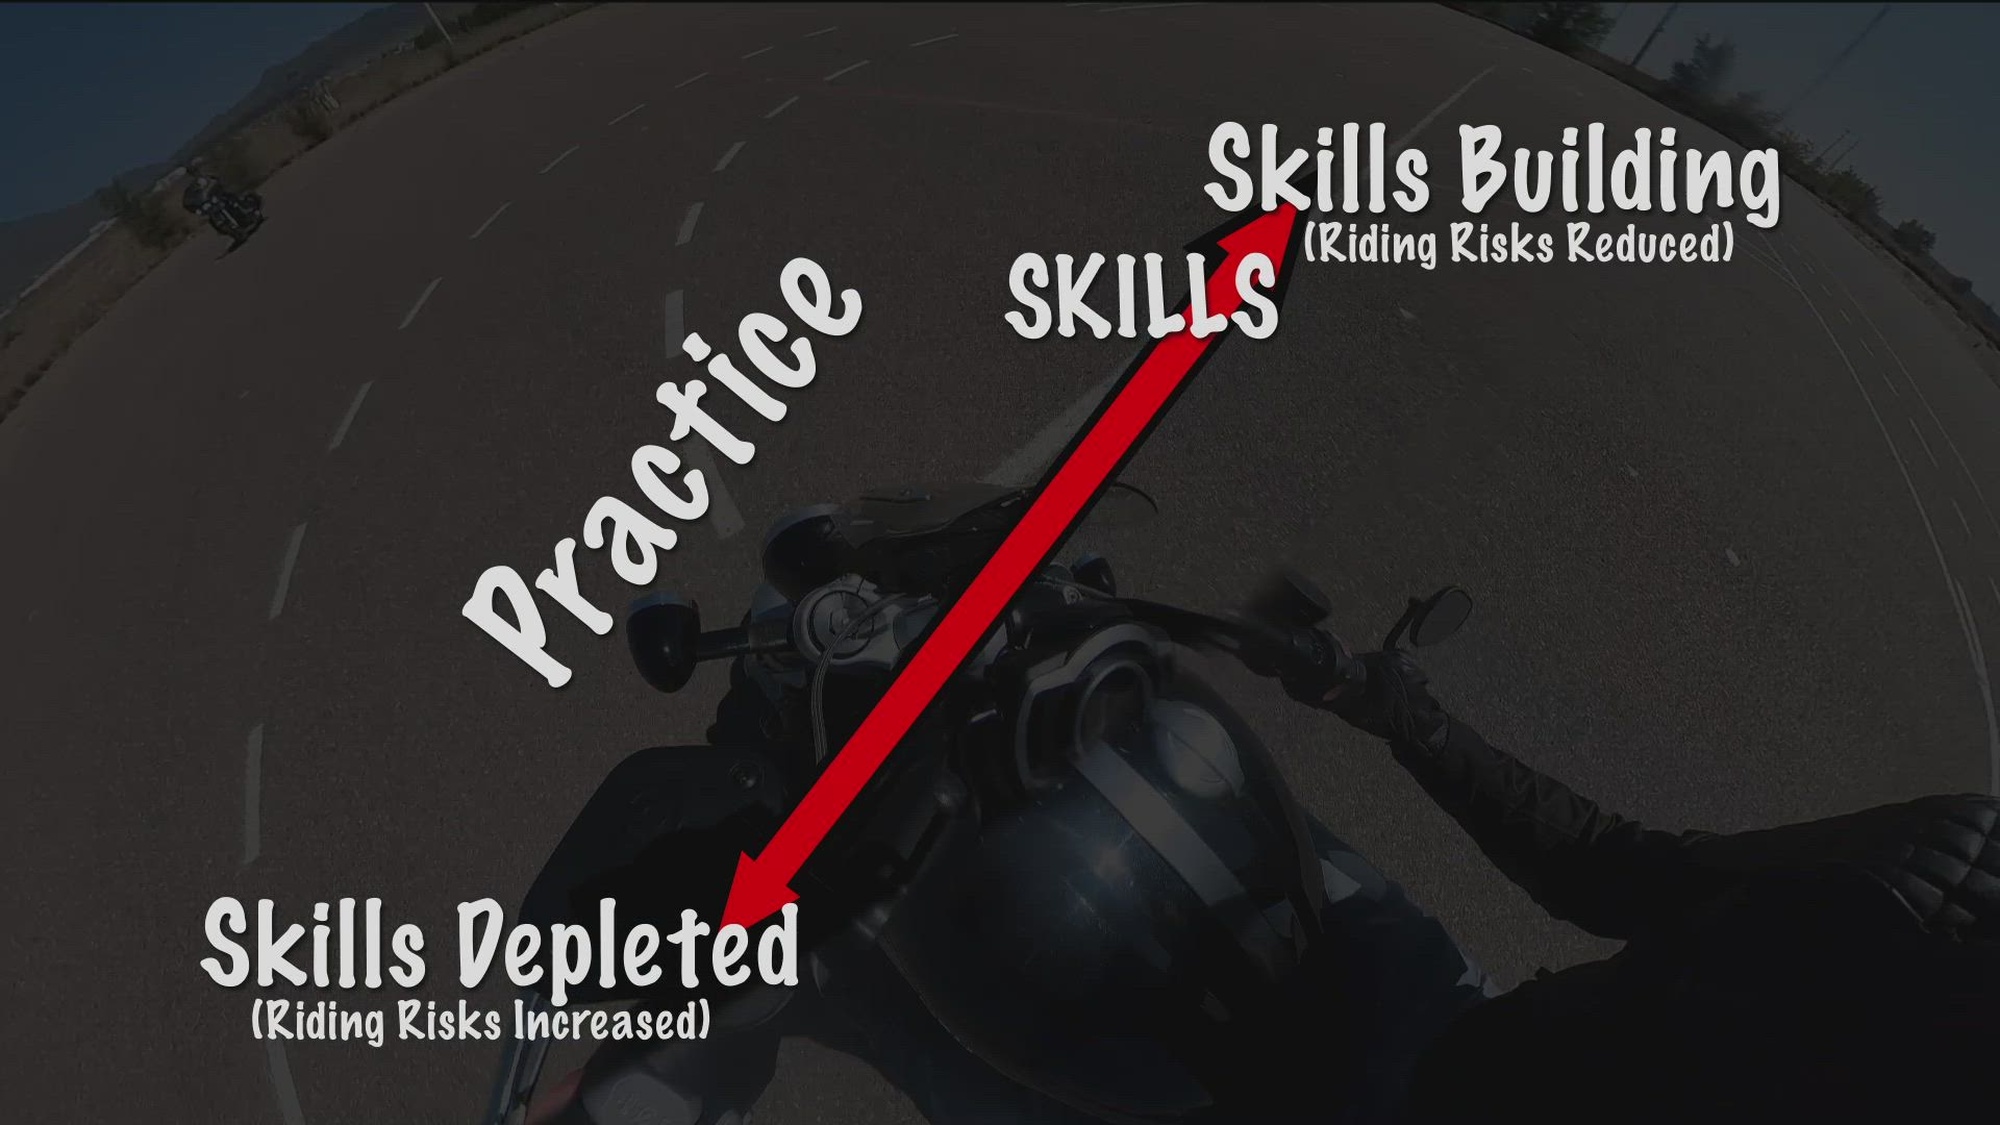 Riding a motorcycle requires skills building. The more you ride can help you build those skills, but when you don't ride often those skills can diminish.